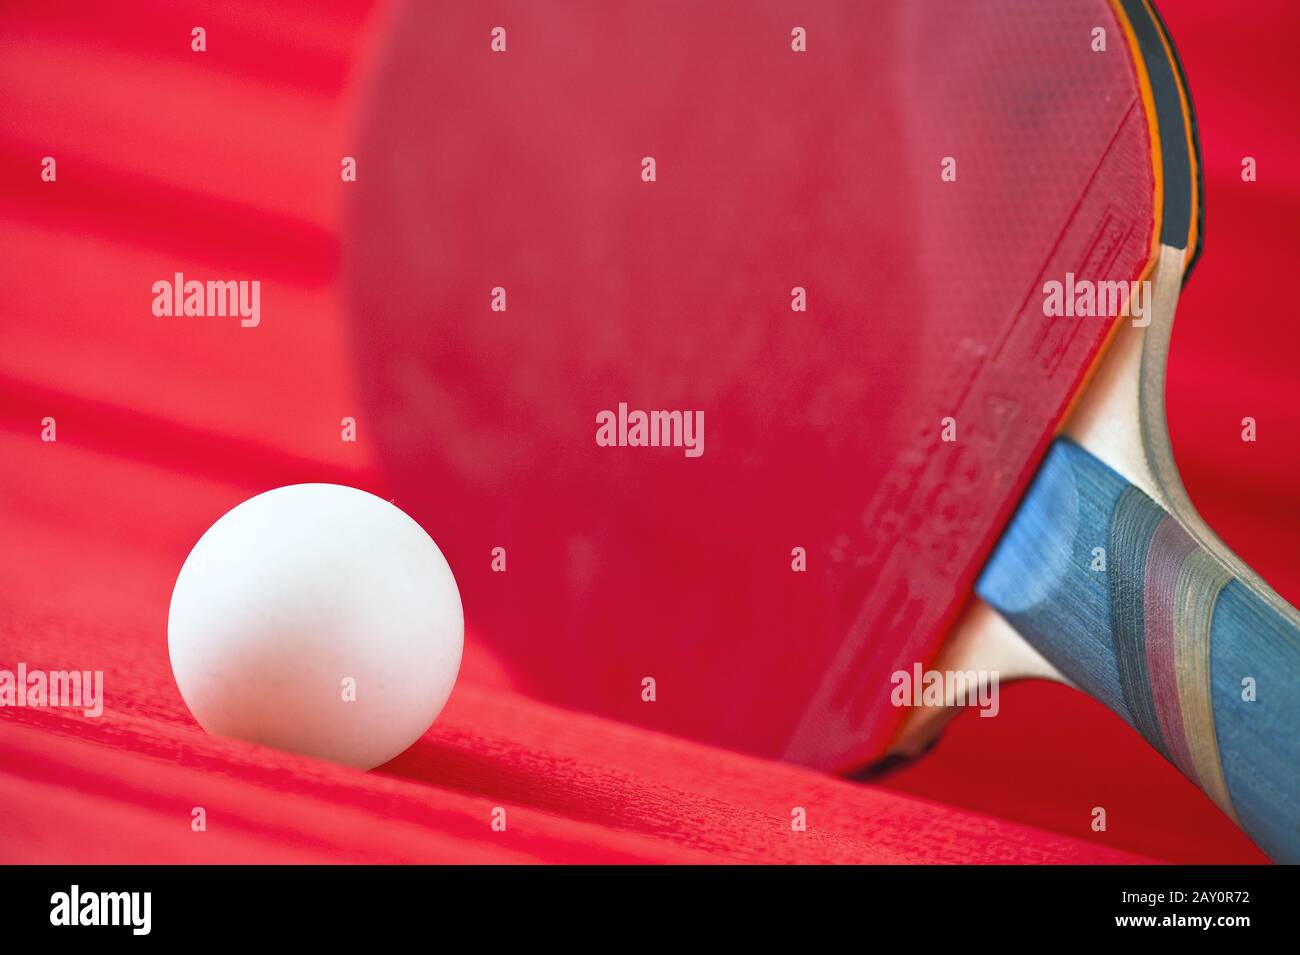 Table tennis ball with bat Stock Photo